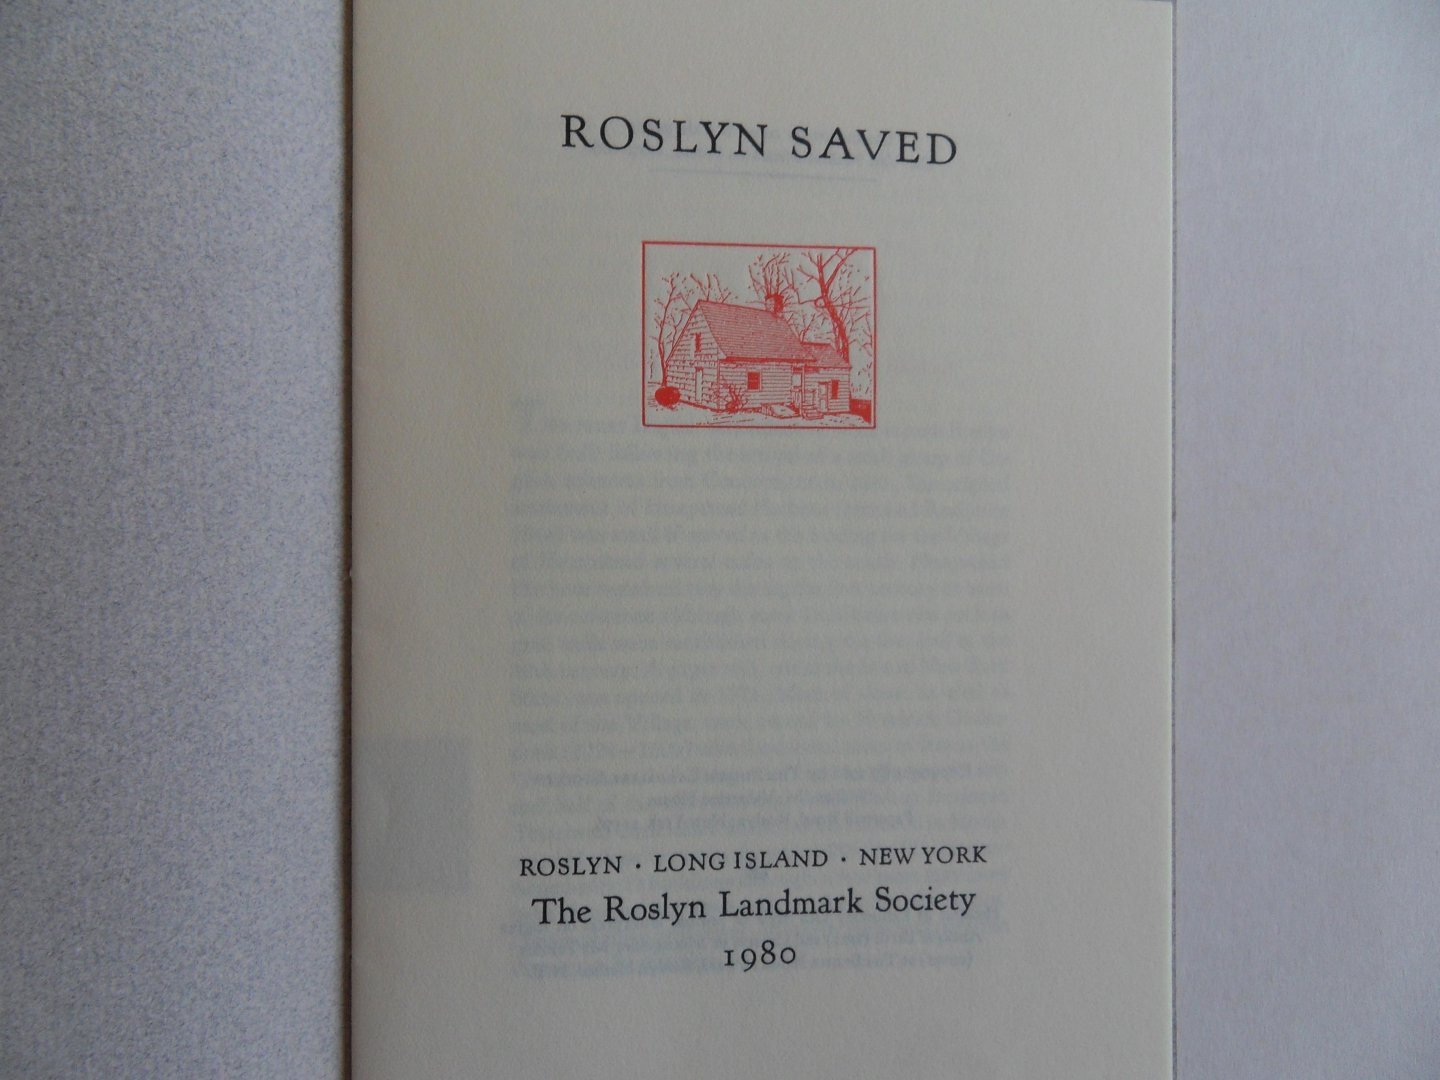 Gerry, Roger [ For the Roslyn Landmark Society ]. - Roslyn Saved. [ Bibliophile edition ].